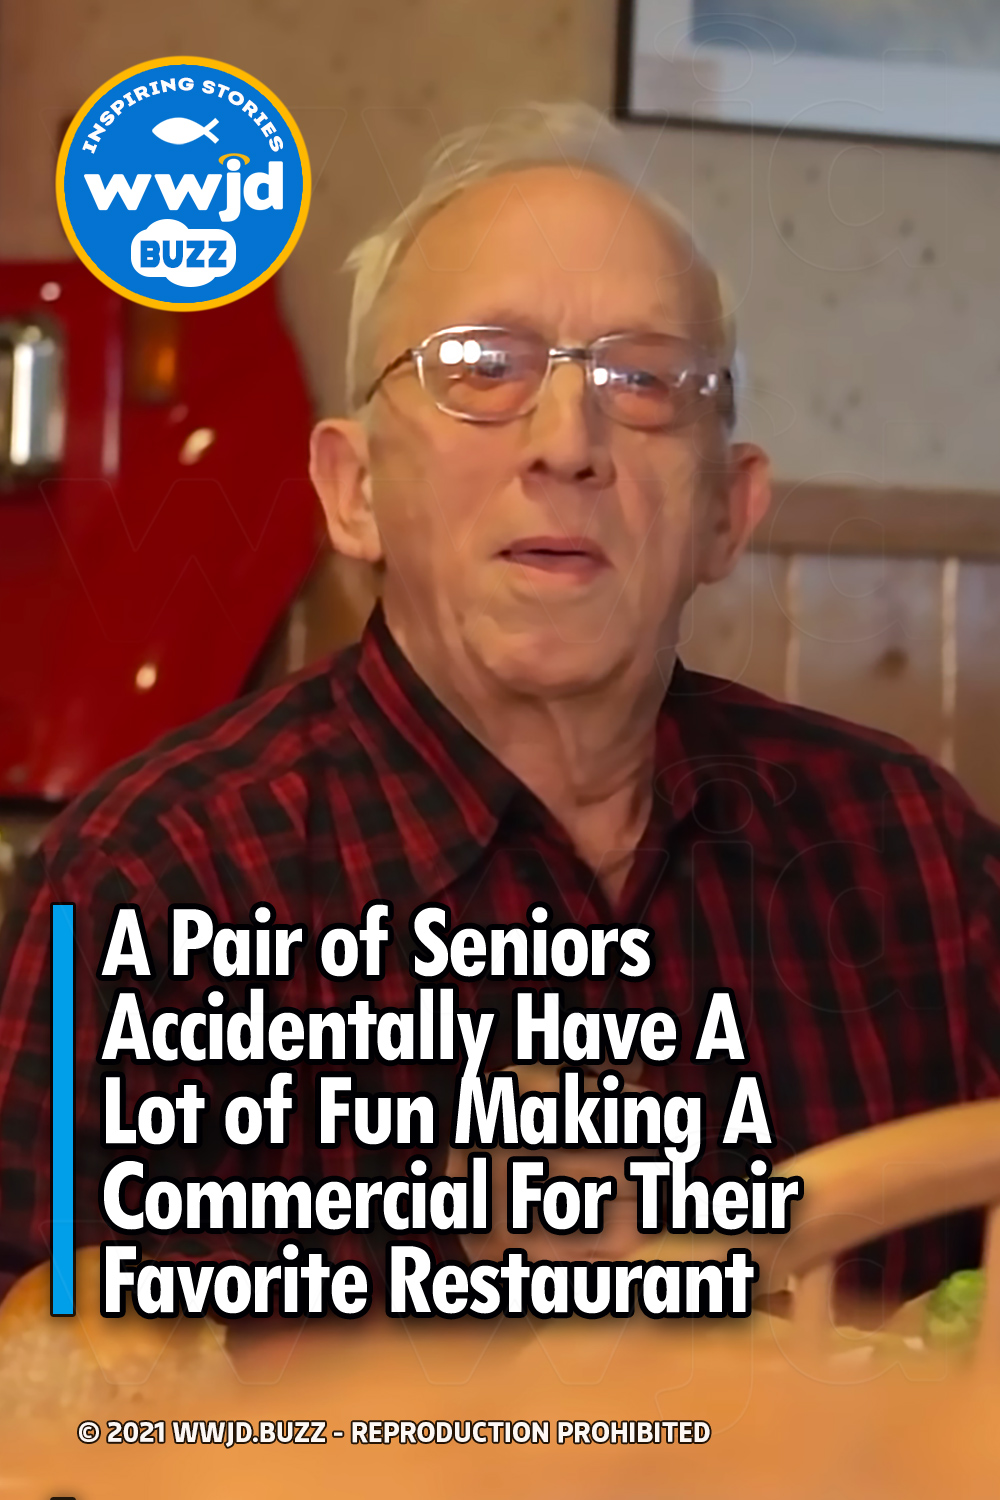 A Pair of Seniors Accidentally Have A Lot of Fun Making A Commercial For Their Favorite Restaurant